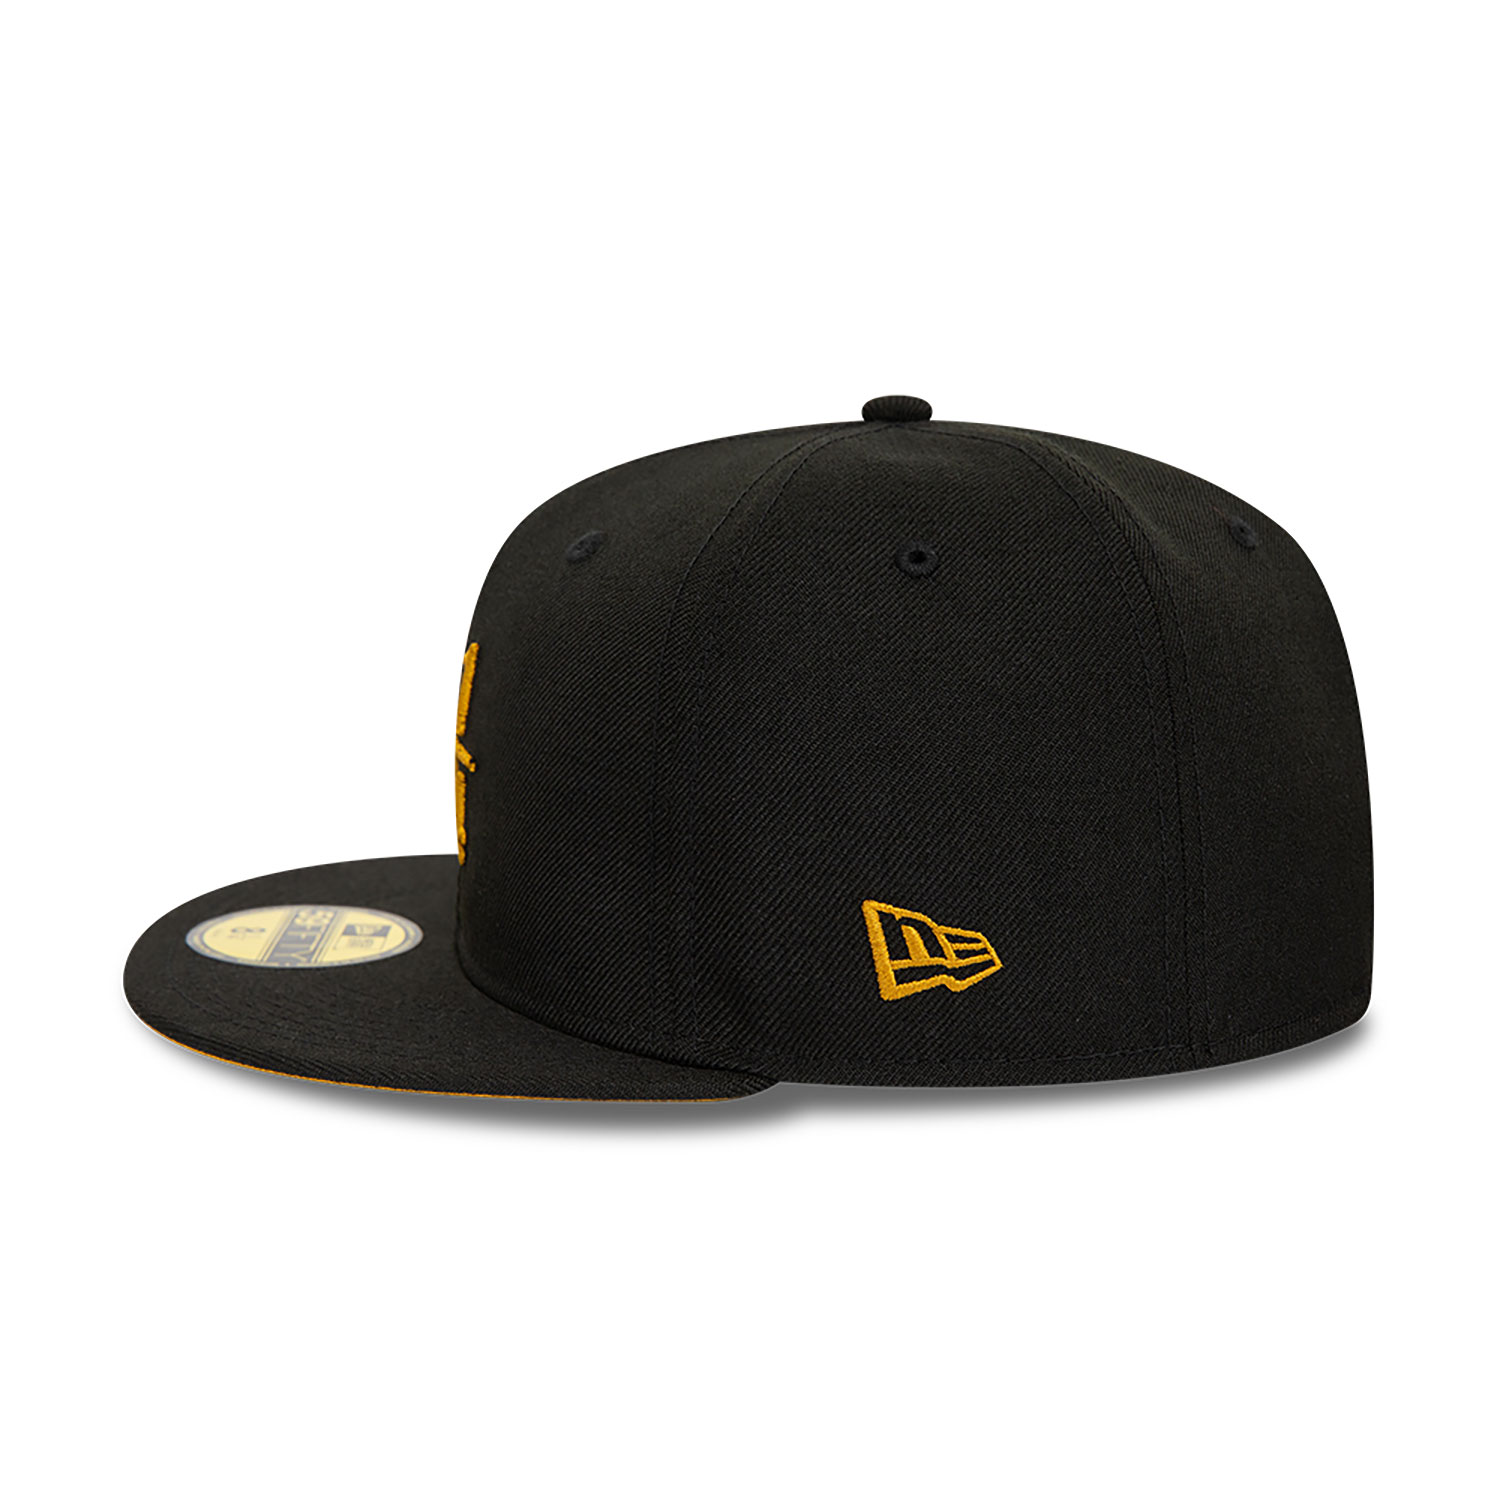 New Era 8 1/4 59FIFTY Black 59FIFTY Fitted Cap